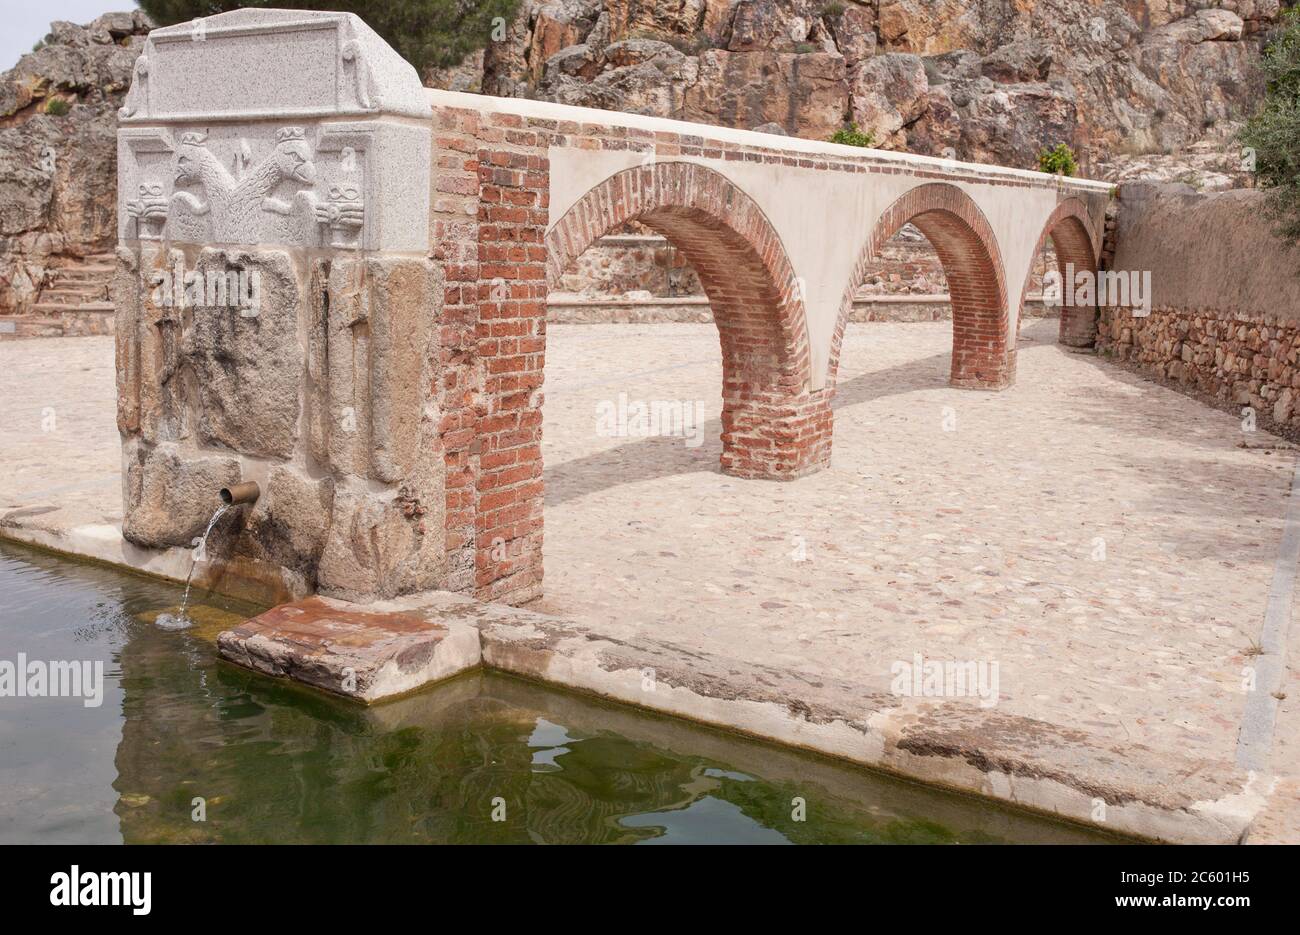 Palomas Pillar fountain built in 16th Century, Hornachos, Spain. Imperial coat of arms of Carlos V carved in the middle. Stock Photo